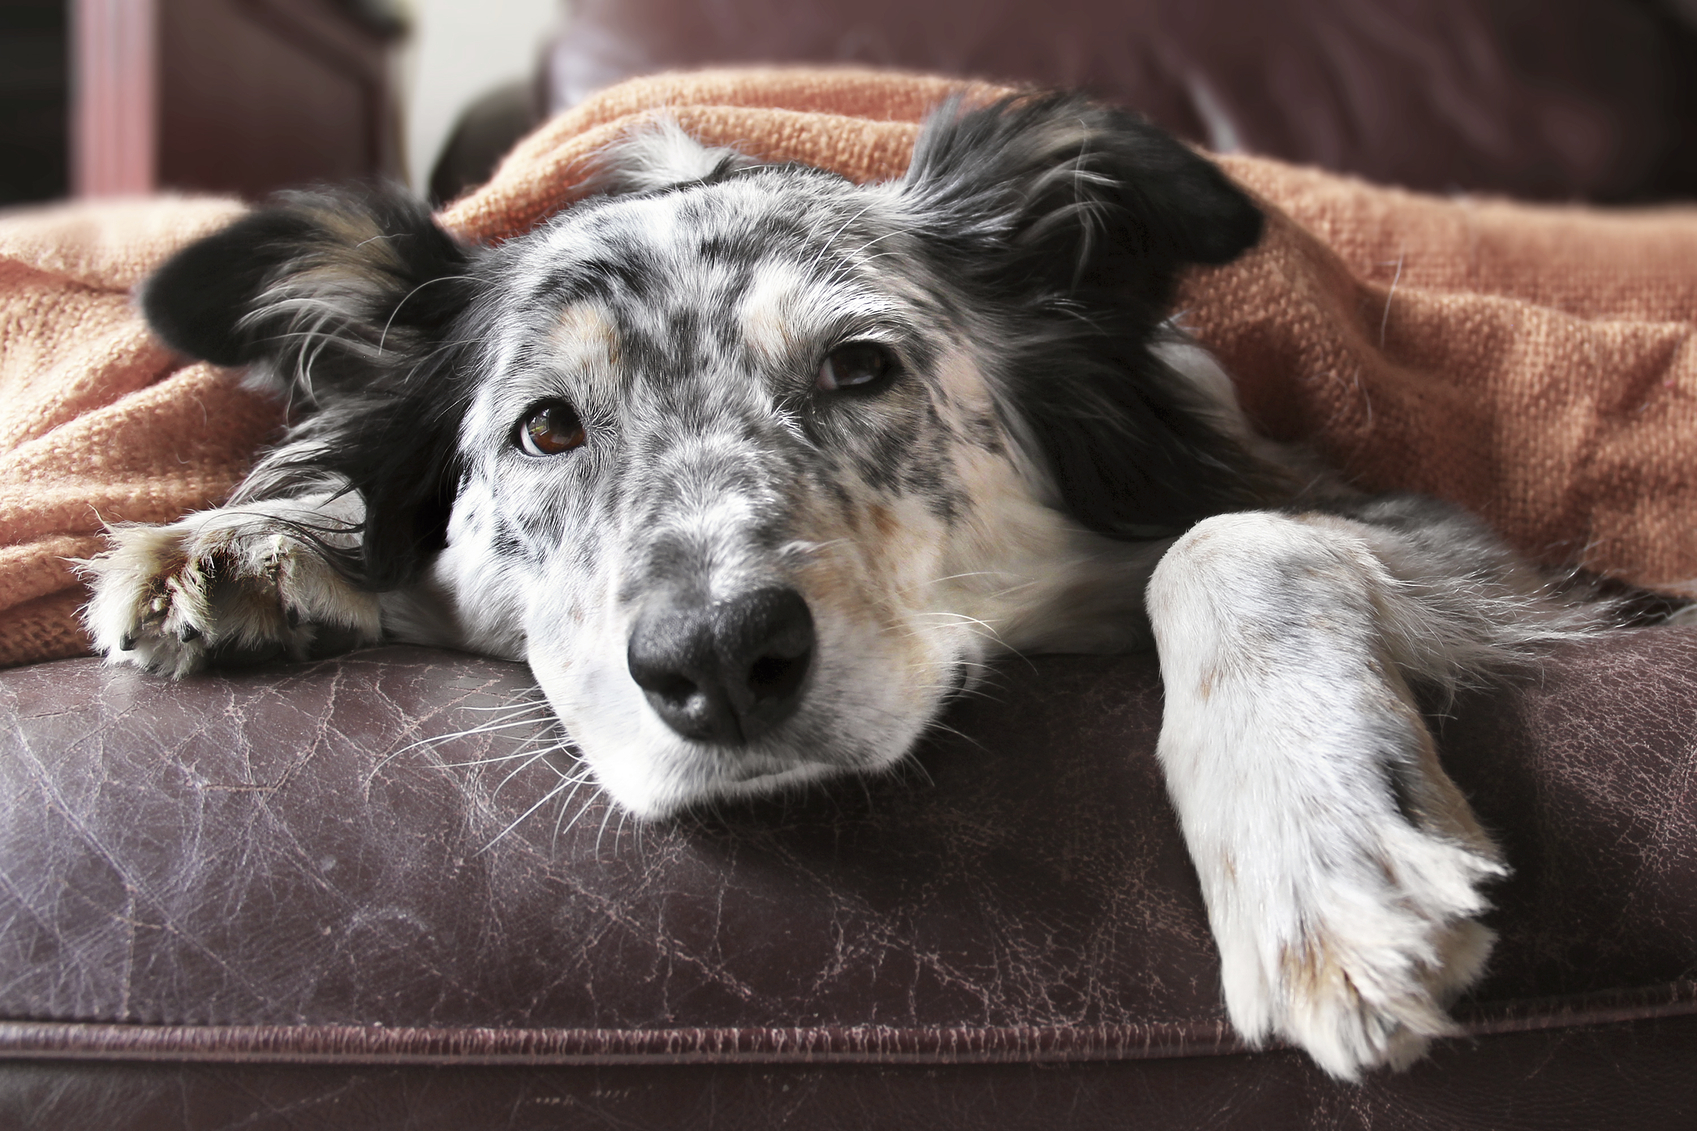 What are the symptoms of a dog dying from liver failure?